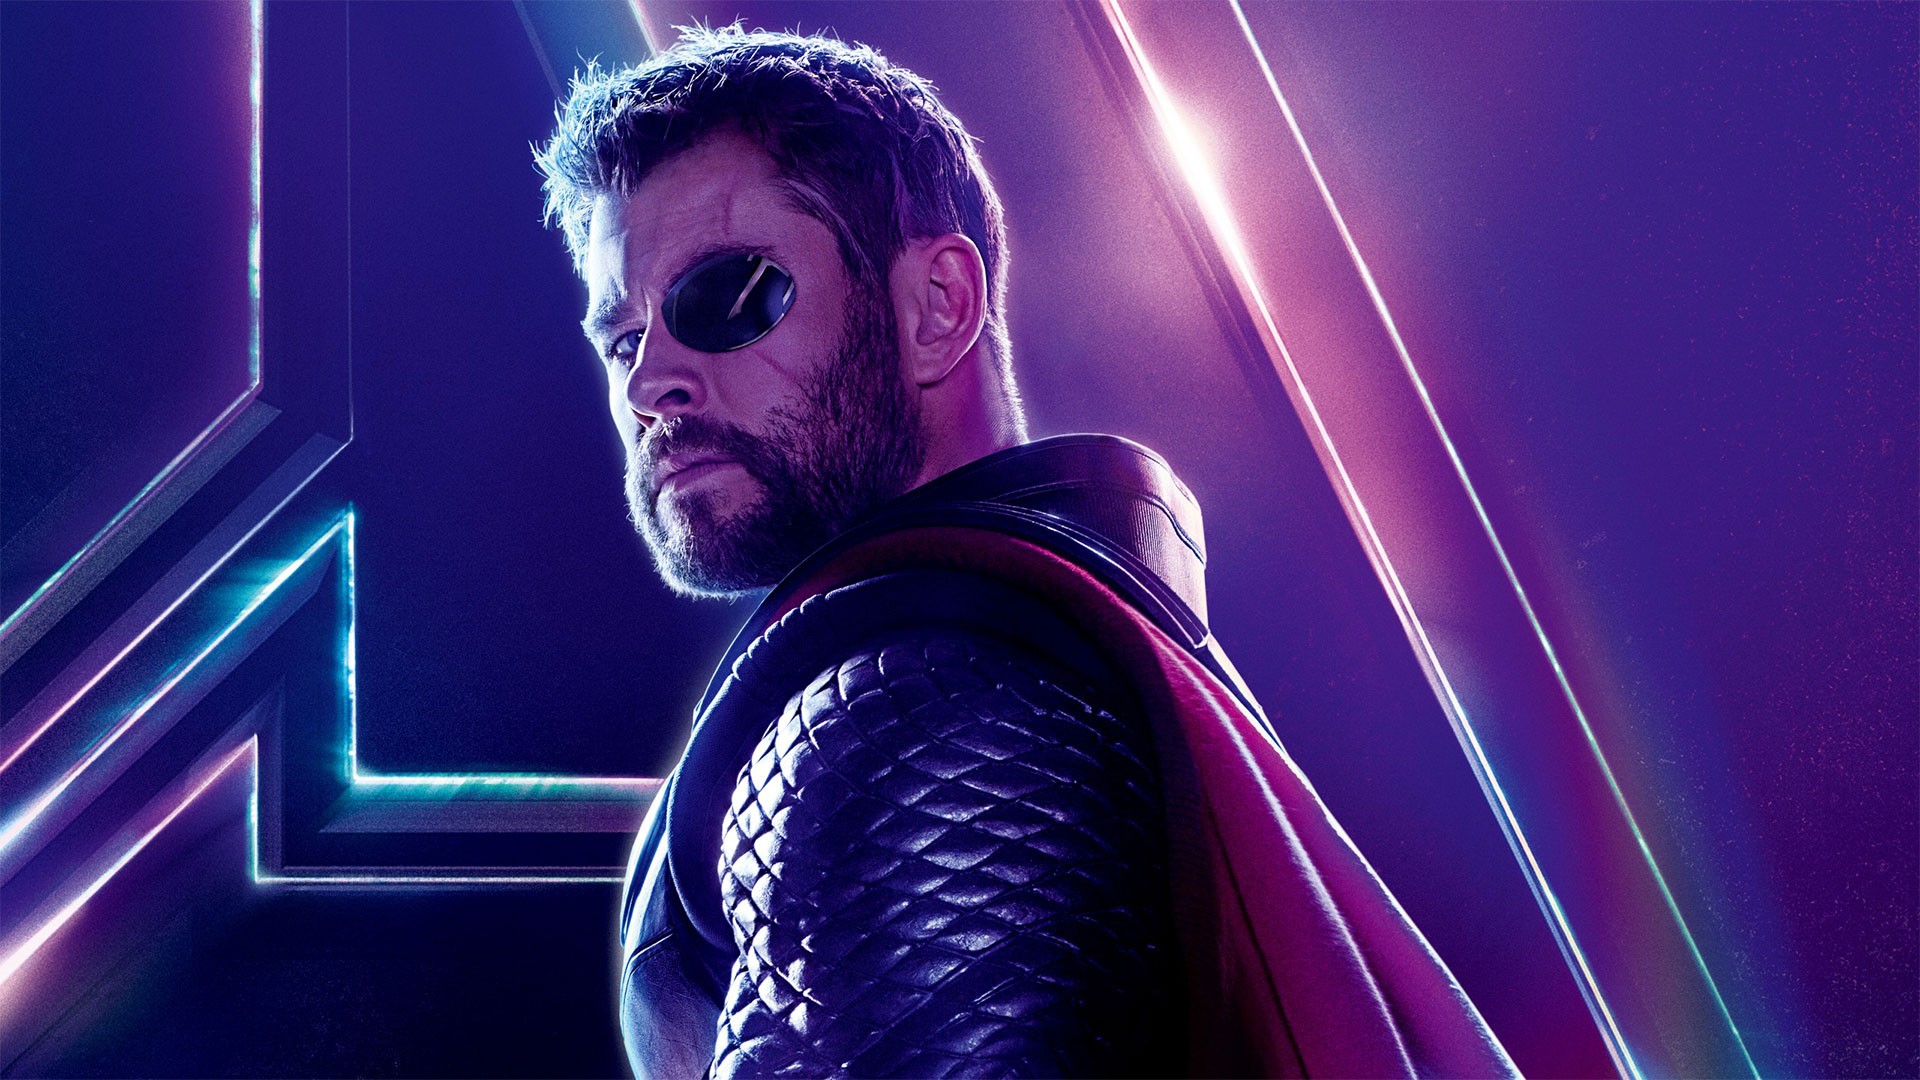 Thor Avengers Endgame Wallpaper HD with high-resolution 1920x1080 pixel. You can use this poster wallpaper for your Desktop Computers, Mac Screensavers, Windows Backgrounds, iPhone Wallpapers, Tablet or Android Lock screen and another Mobile device